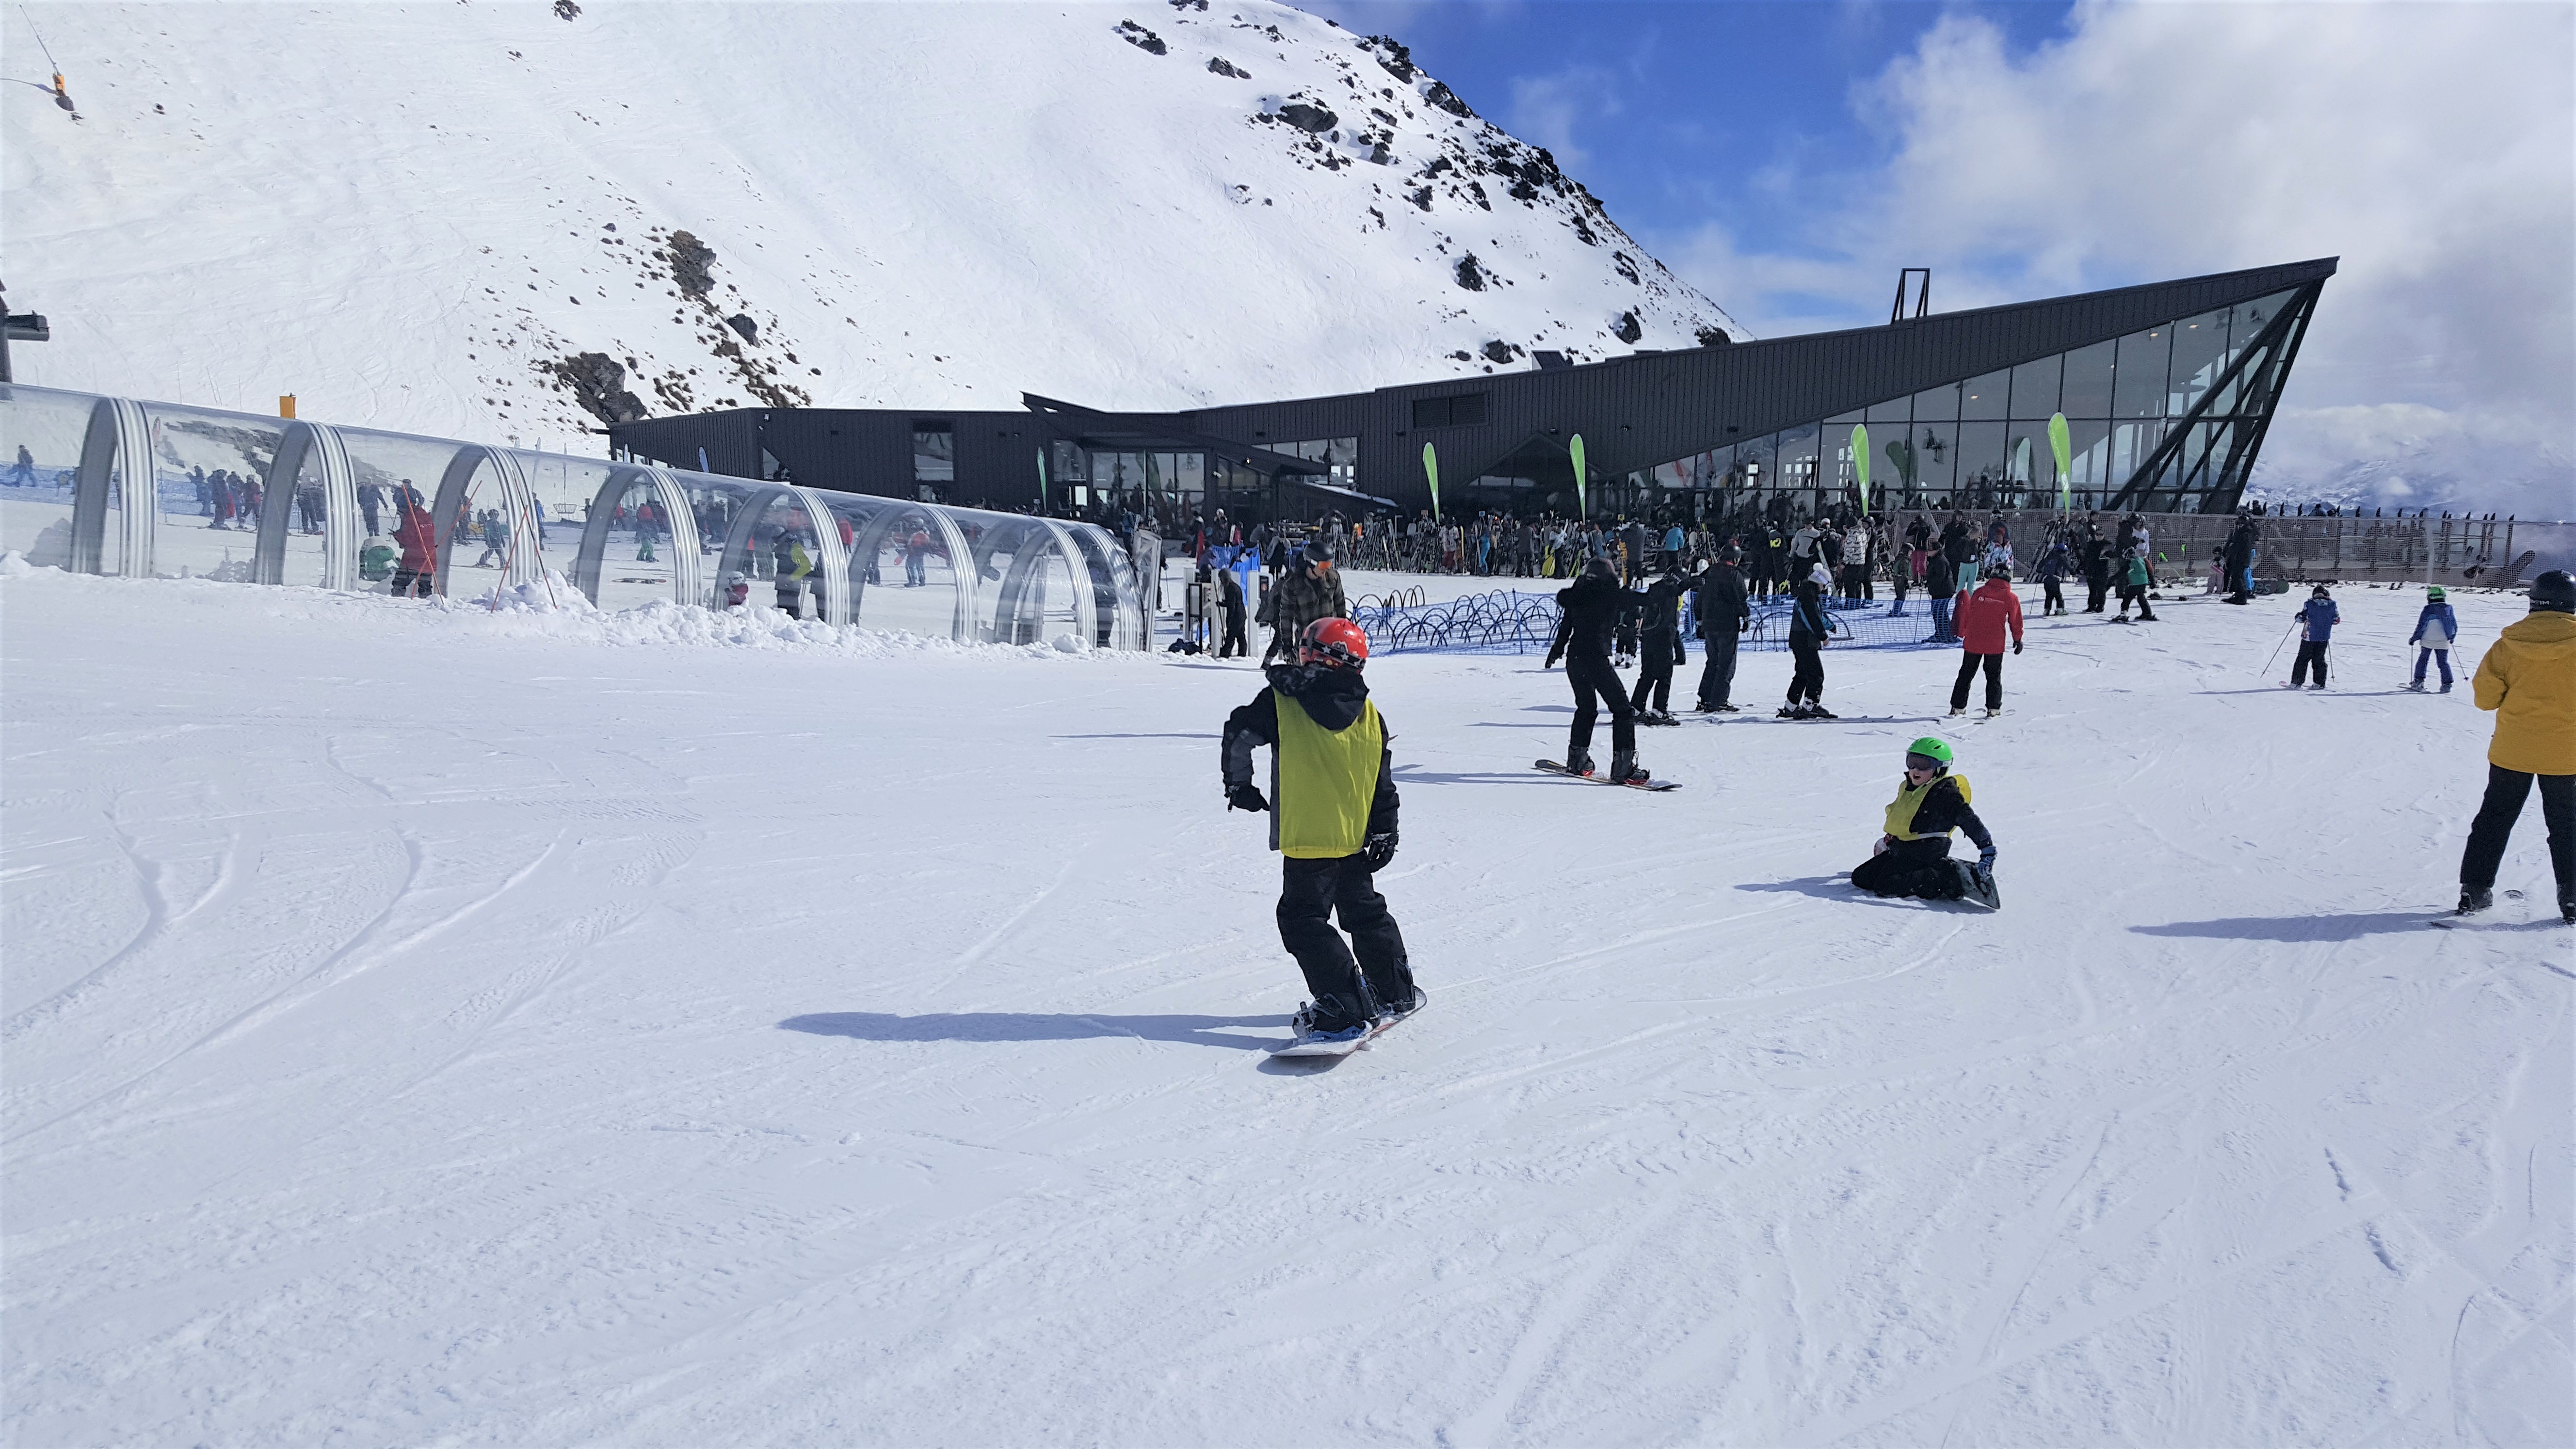 Learning to ski in New Zealand